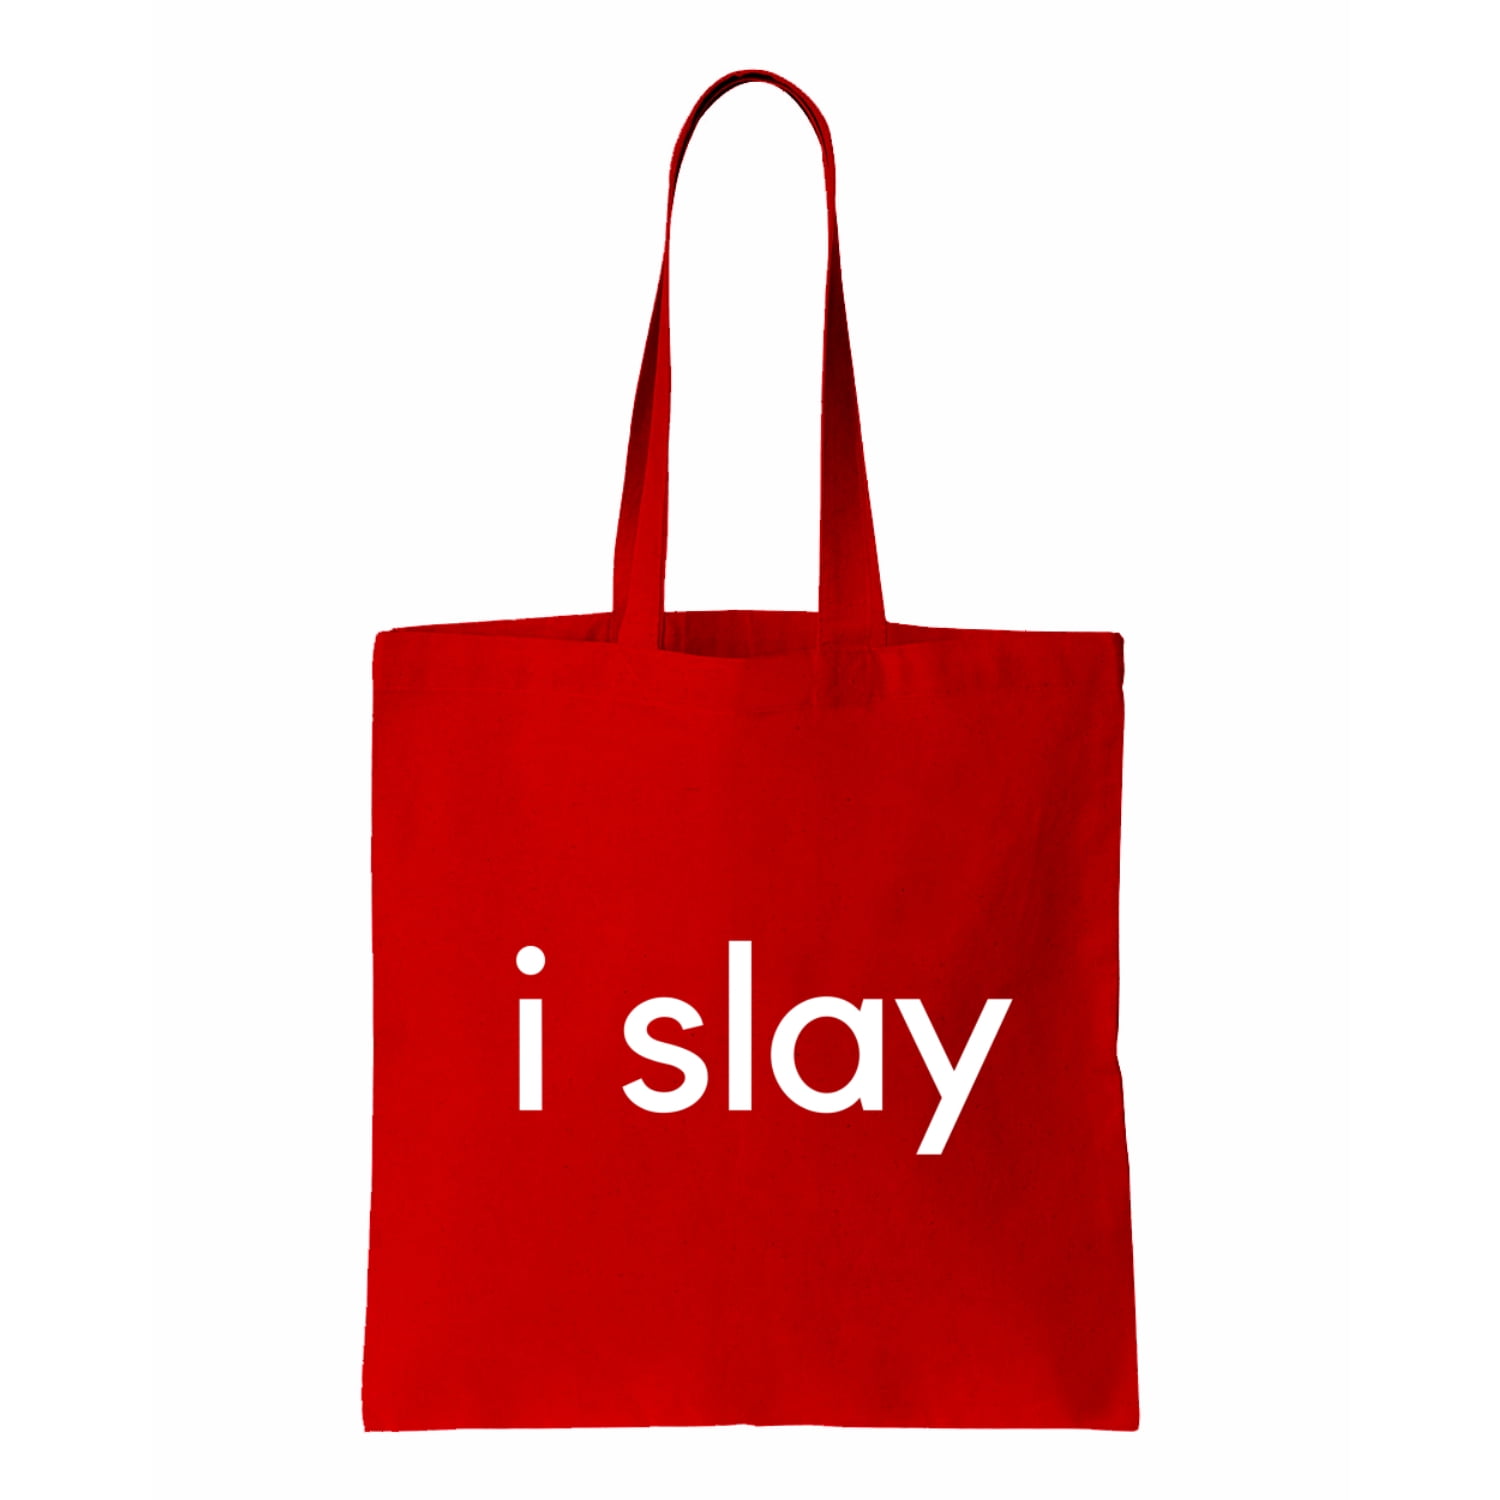 i slay, Girlboss Cotton Canvas Re-Usable Shopping & Carry-All Tote Bag ...